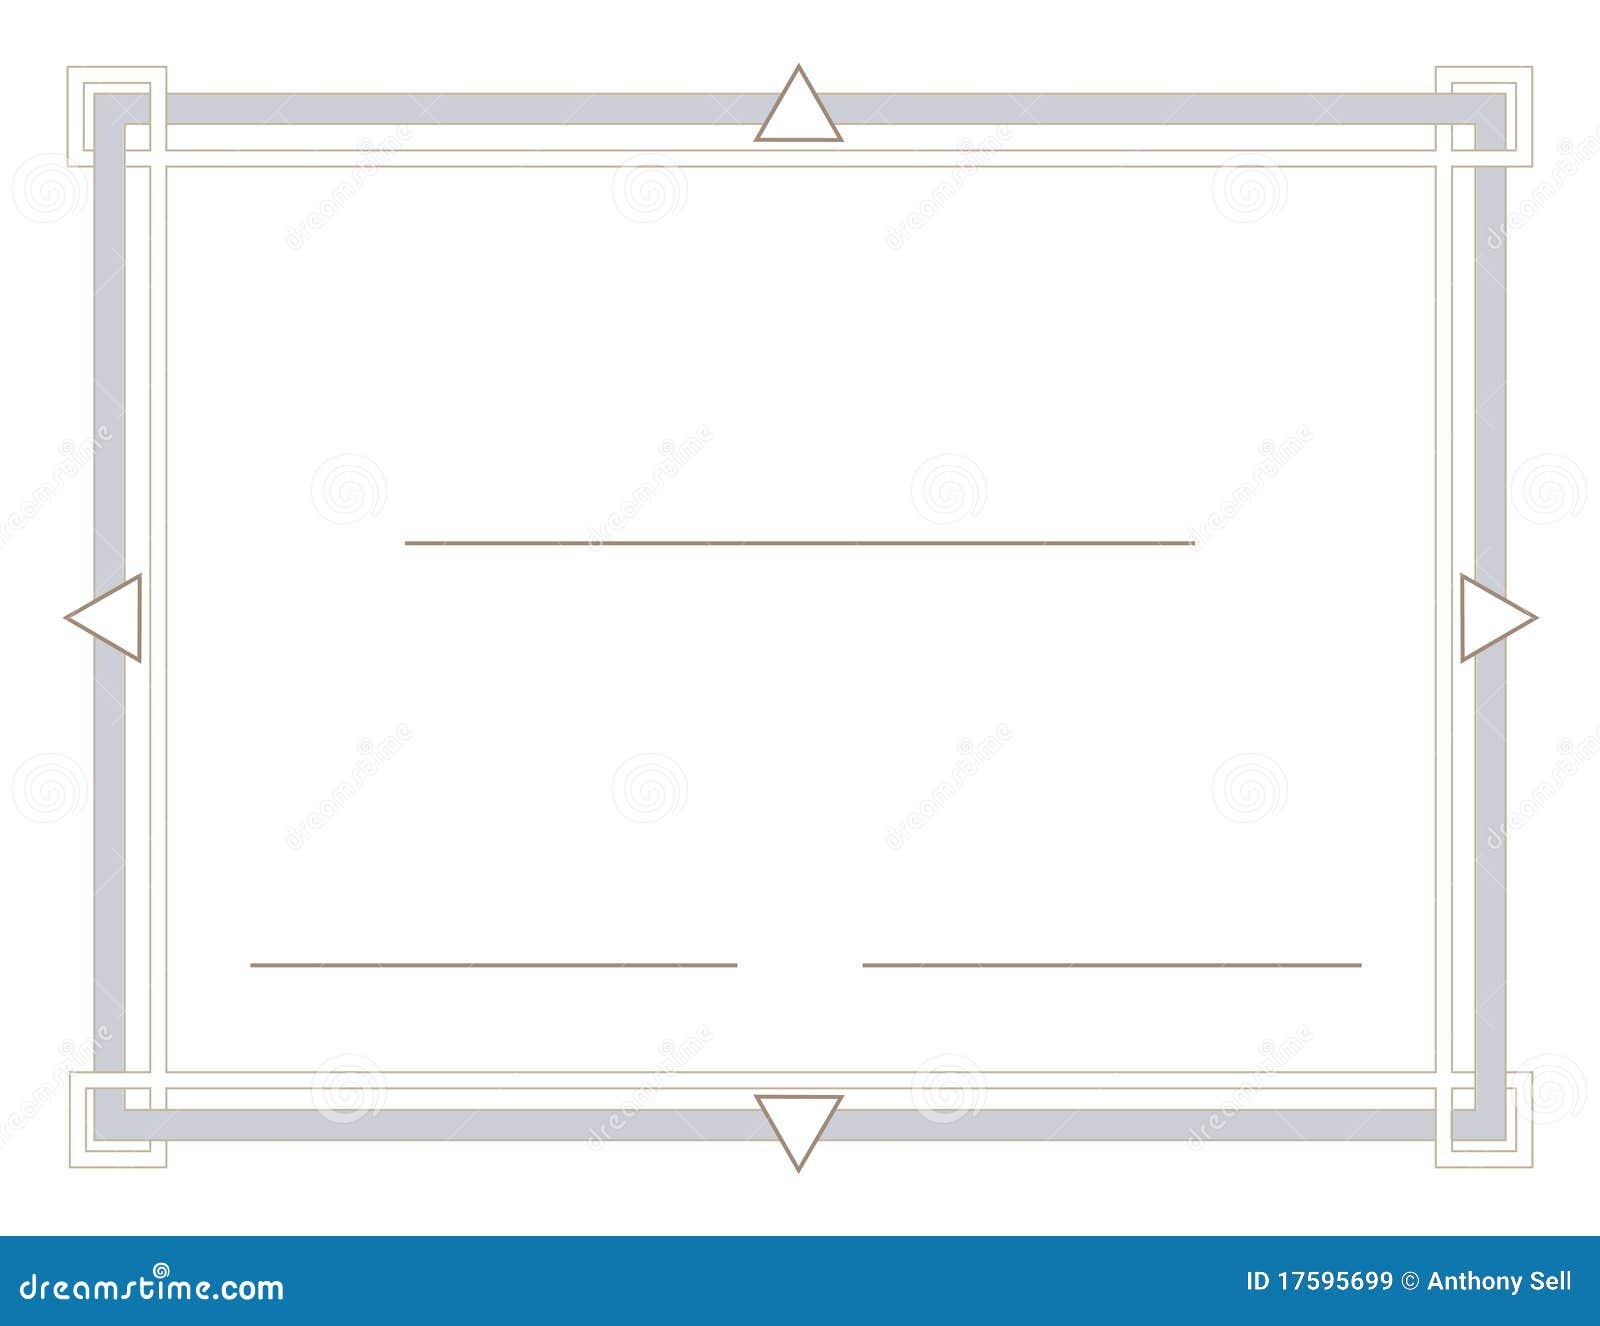 Certificate Border Letter Sized 002 Royalty Free Stock Images